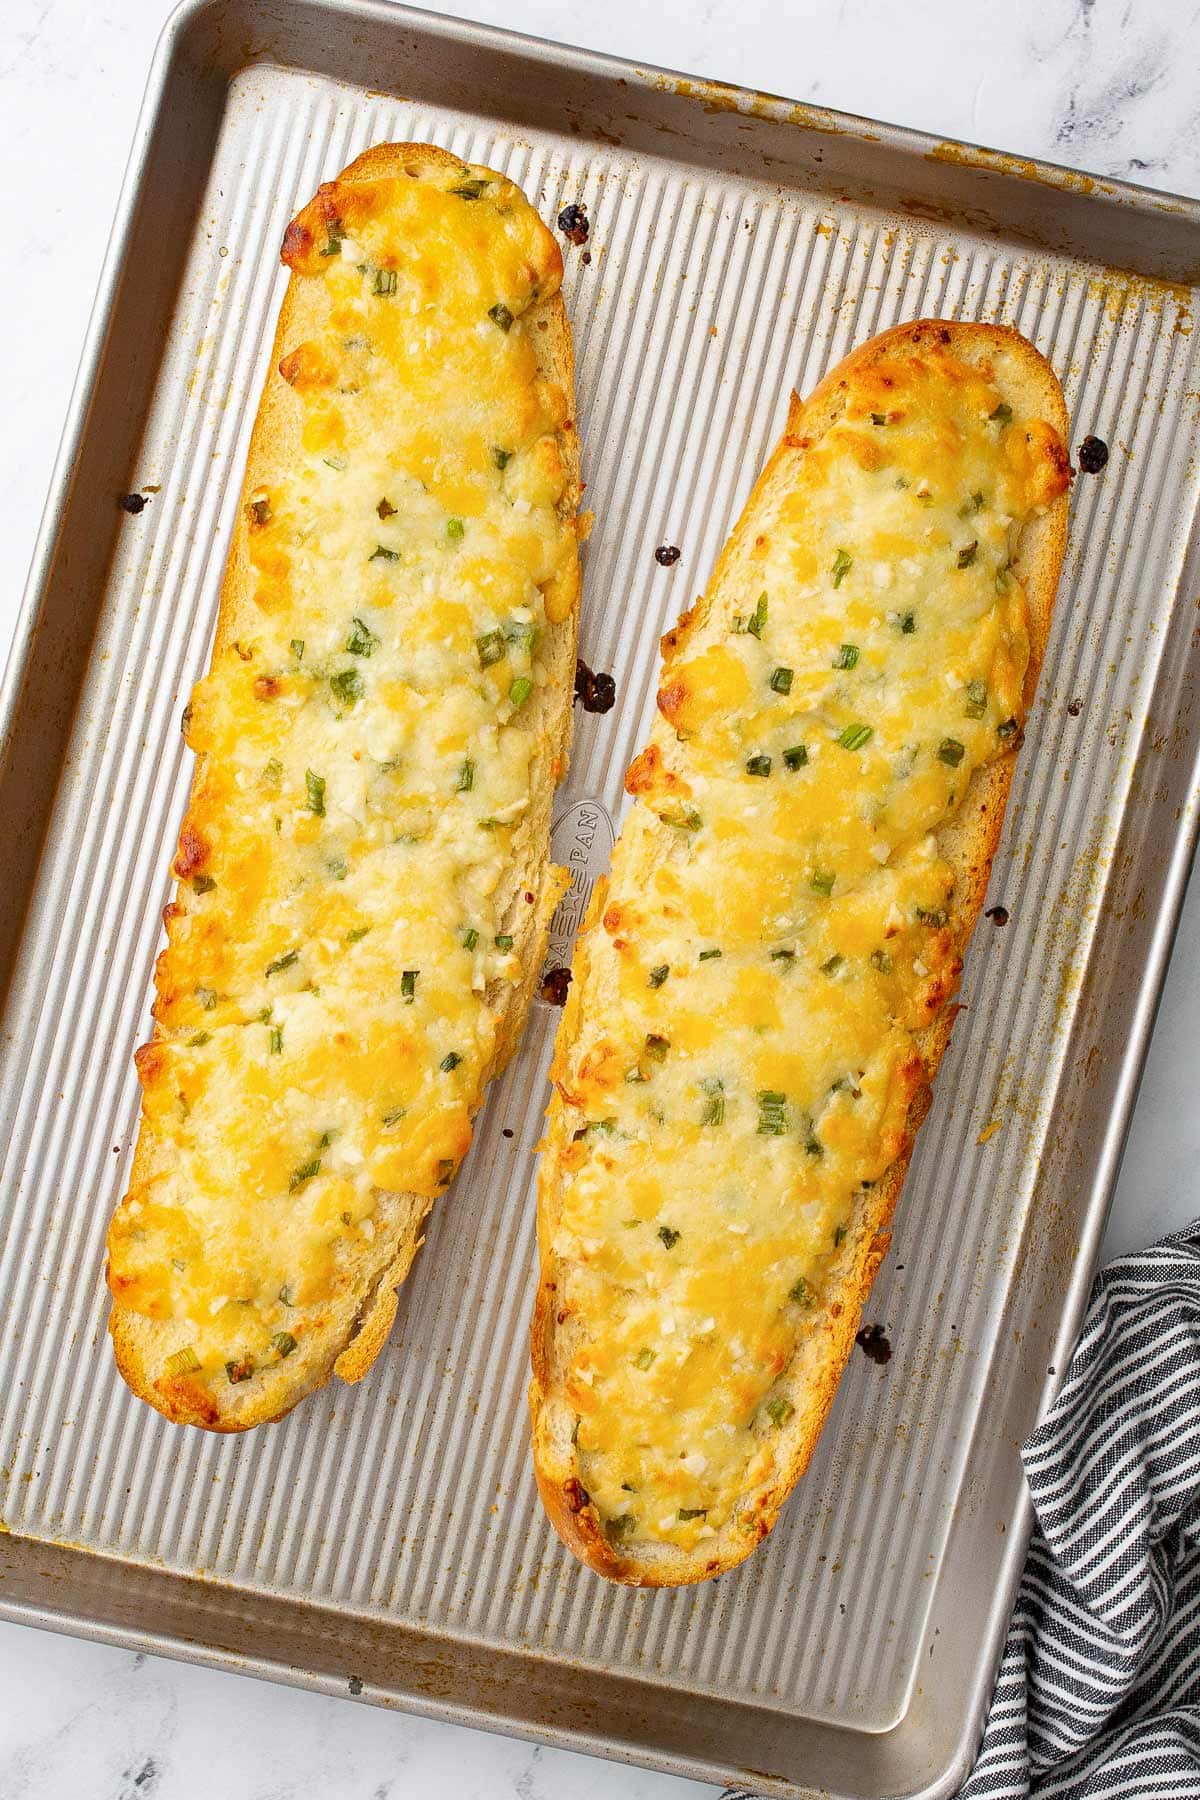 Two half loaves of freshly baked cheesy garlic bread on a baking sheet.